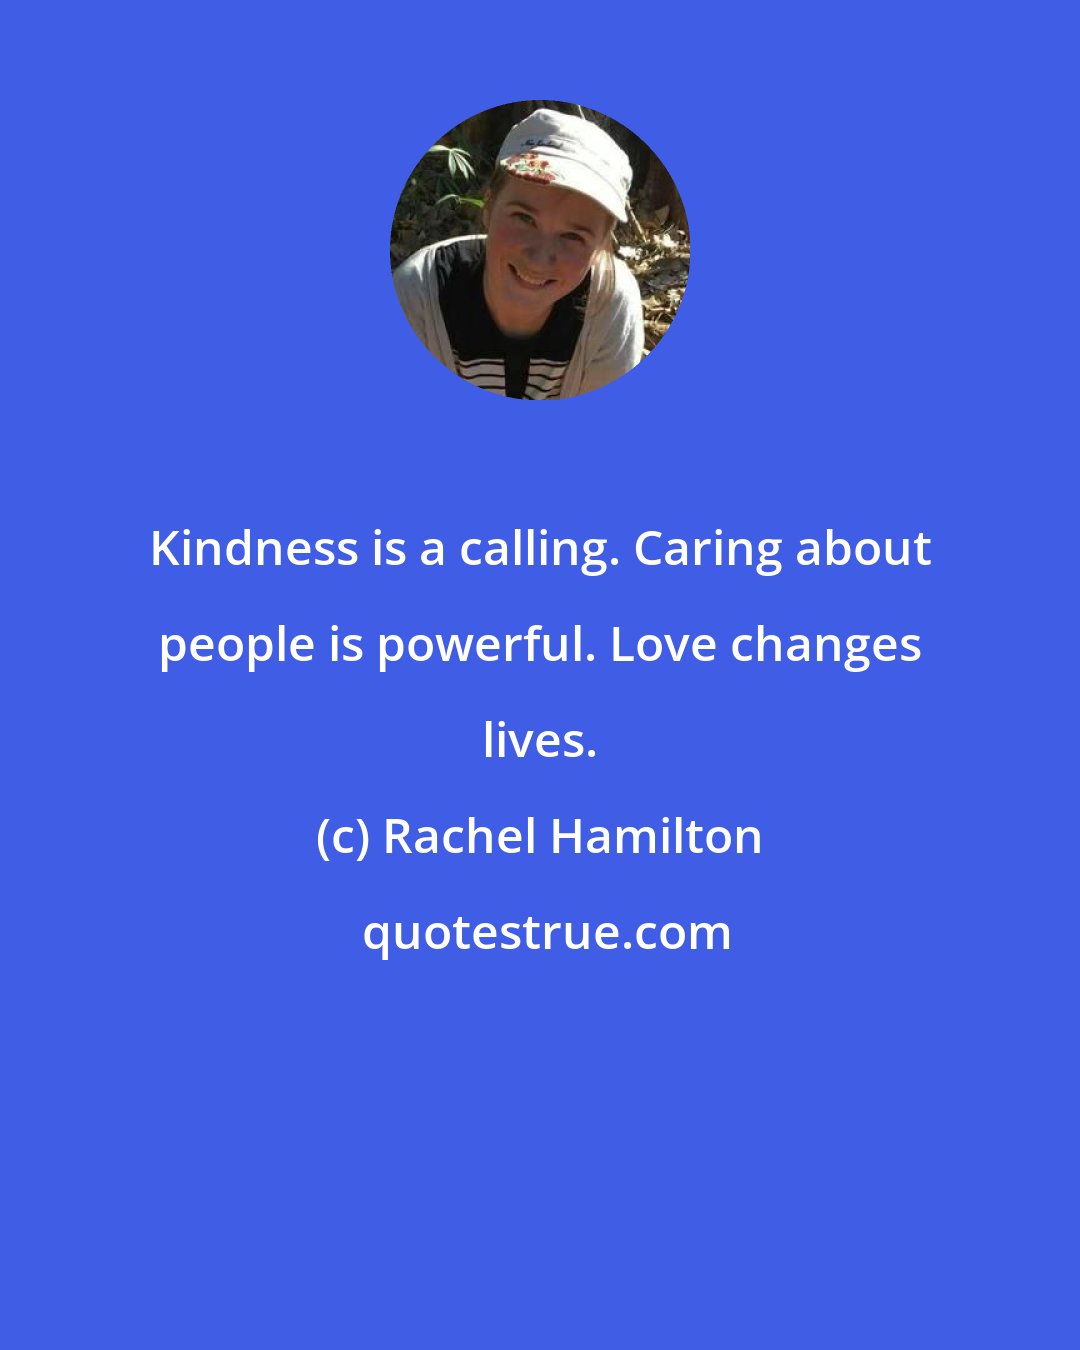 Rachel Hamilton: Kindness is a calling. Caring about people is powerful. Love changes lives.